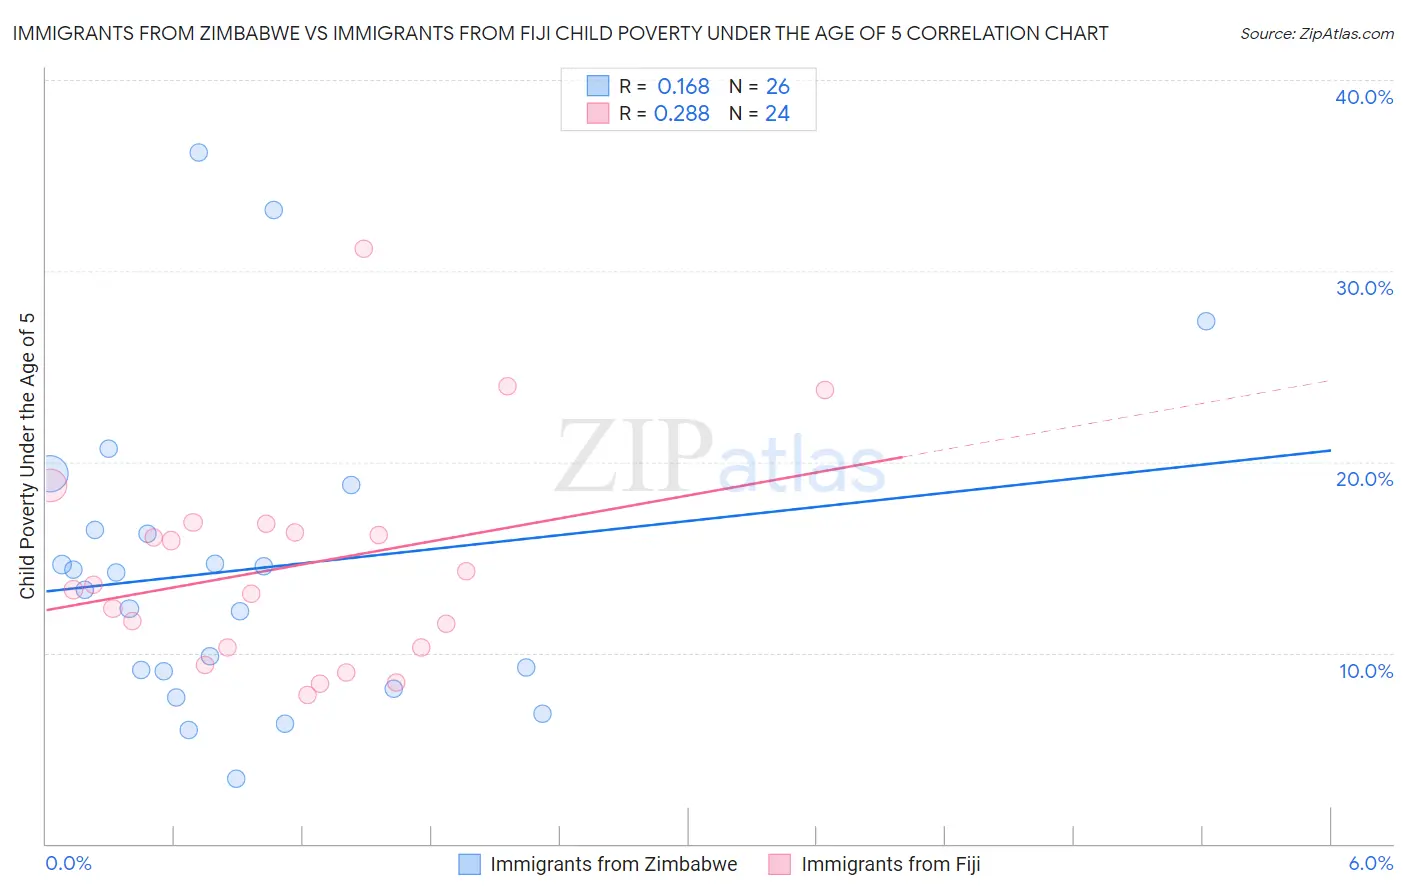 Immigrants from Zimbabwe vs Immigrants from Fiji Child Poverty Under the Age of 5